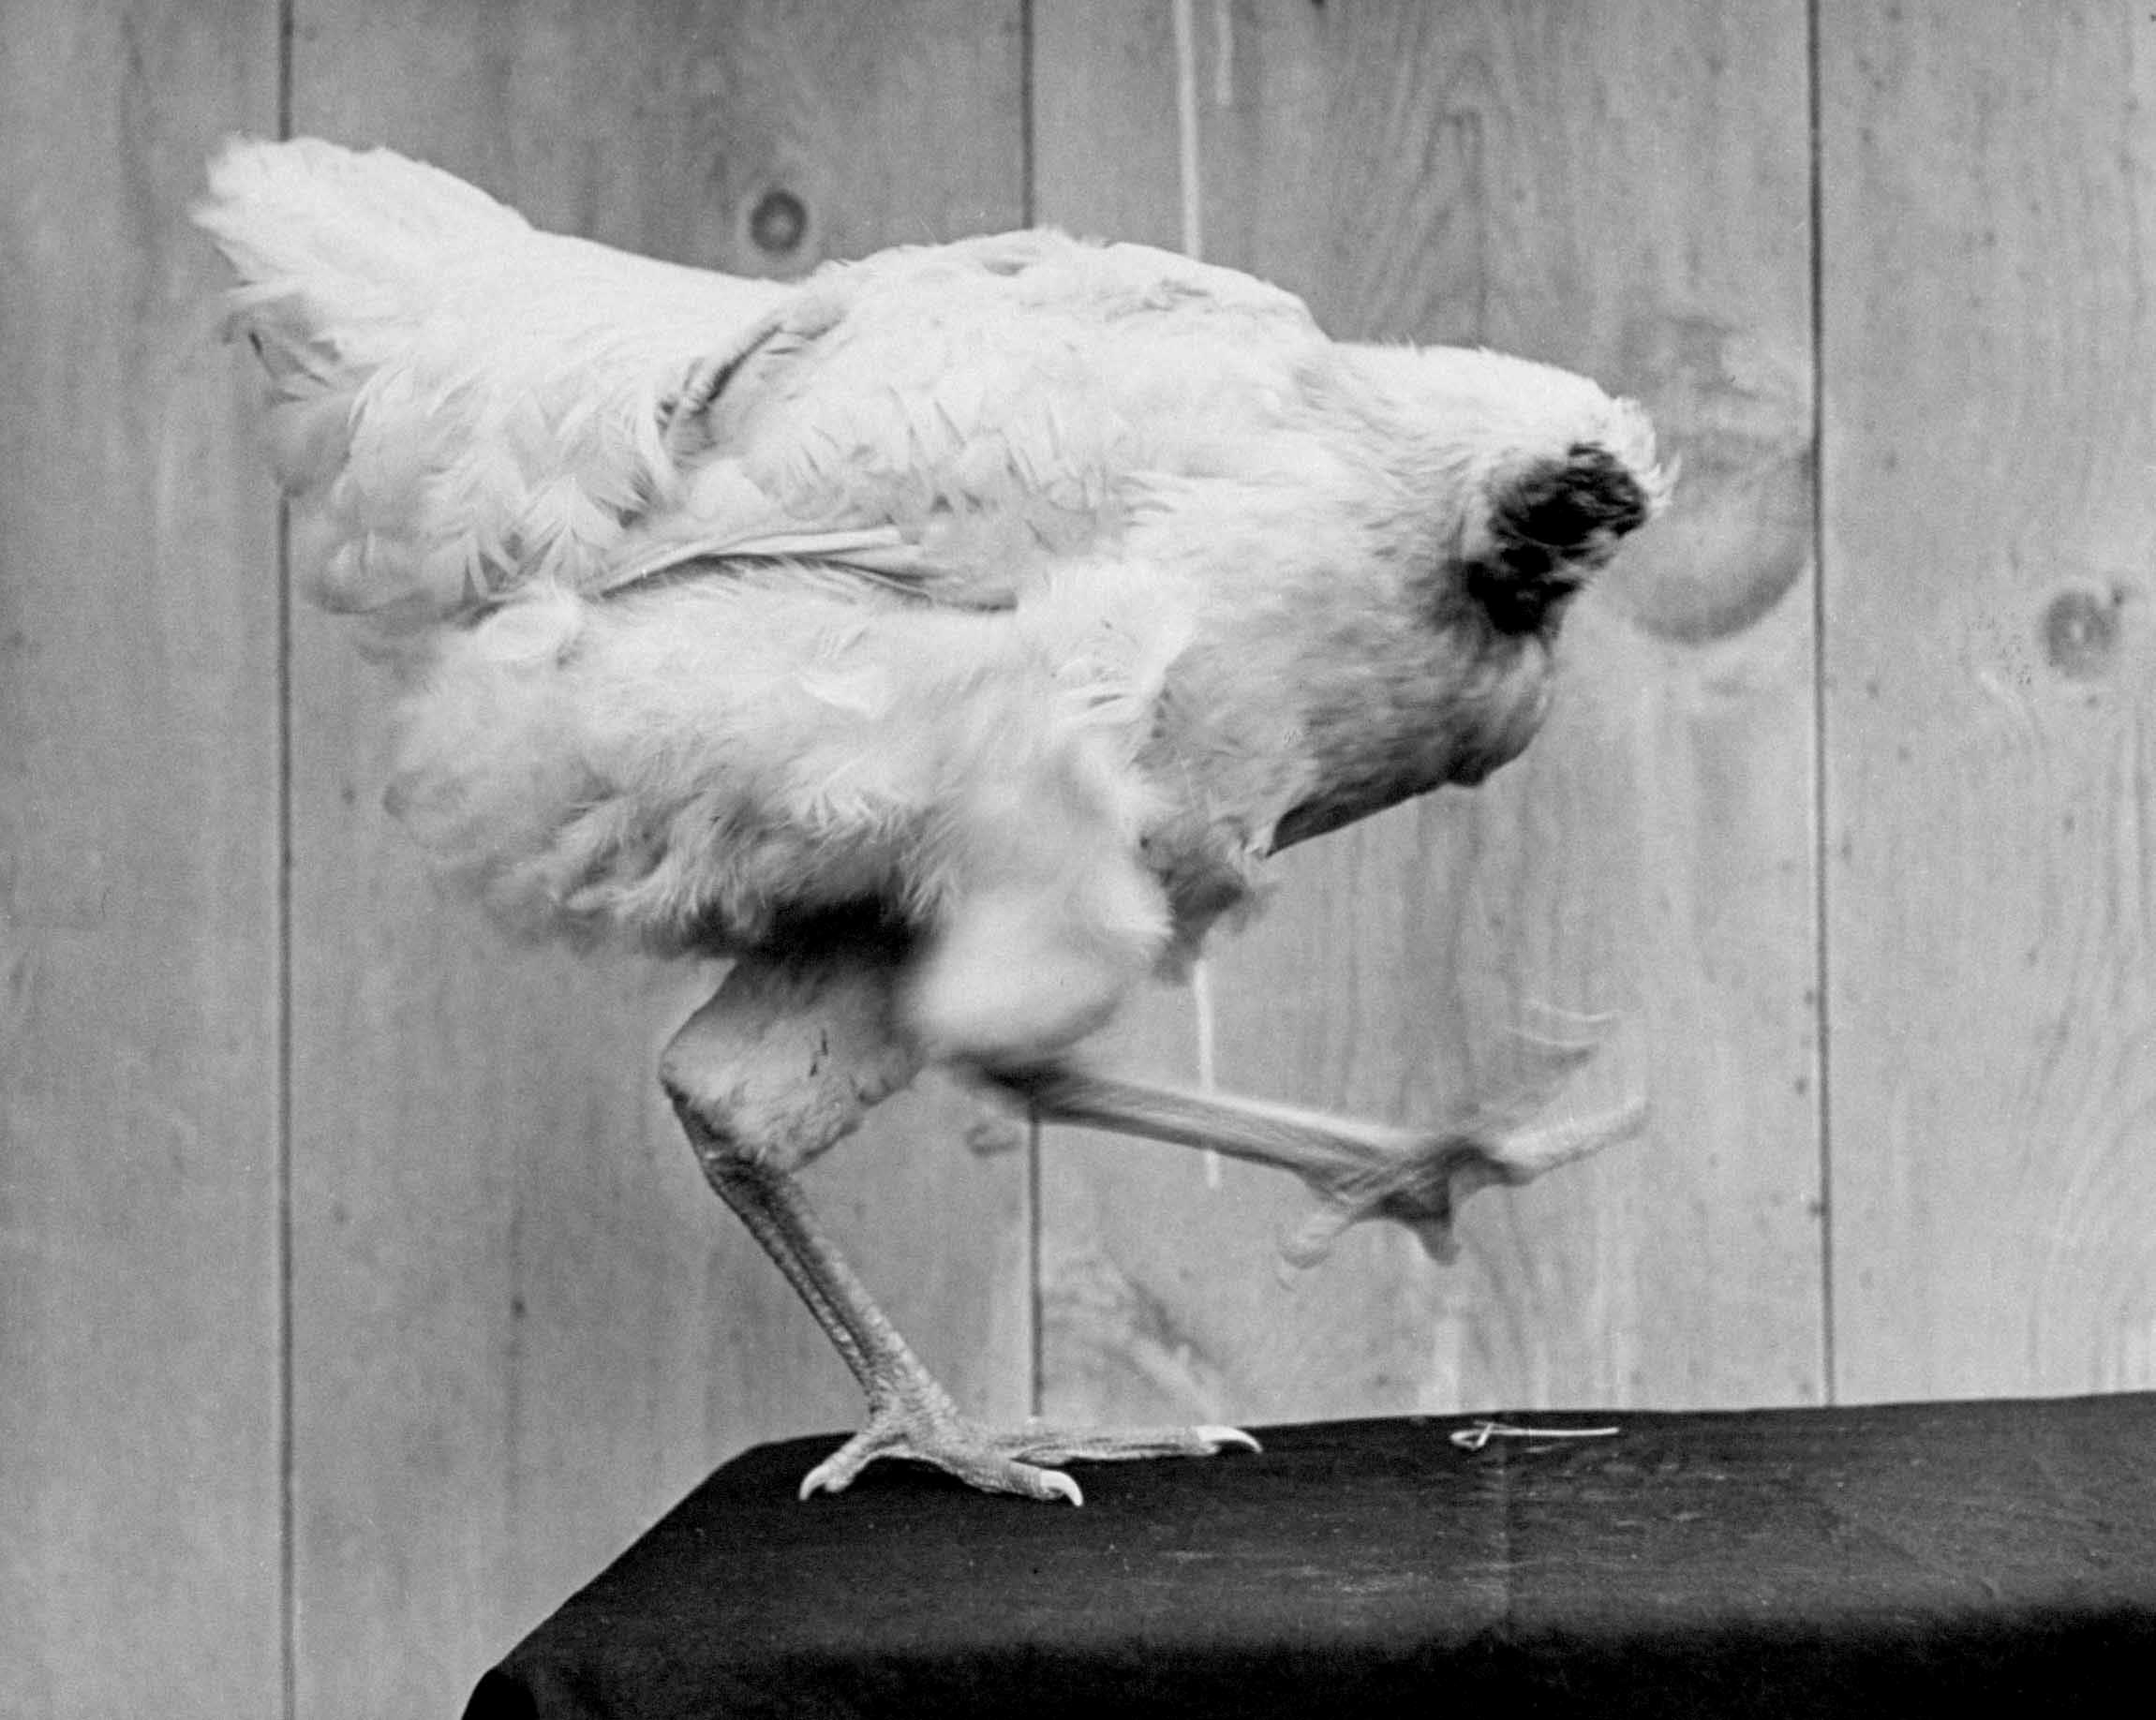 Mike the headless chicken "dances" in 1945.